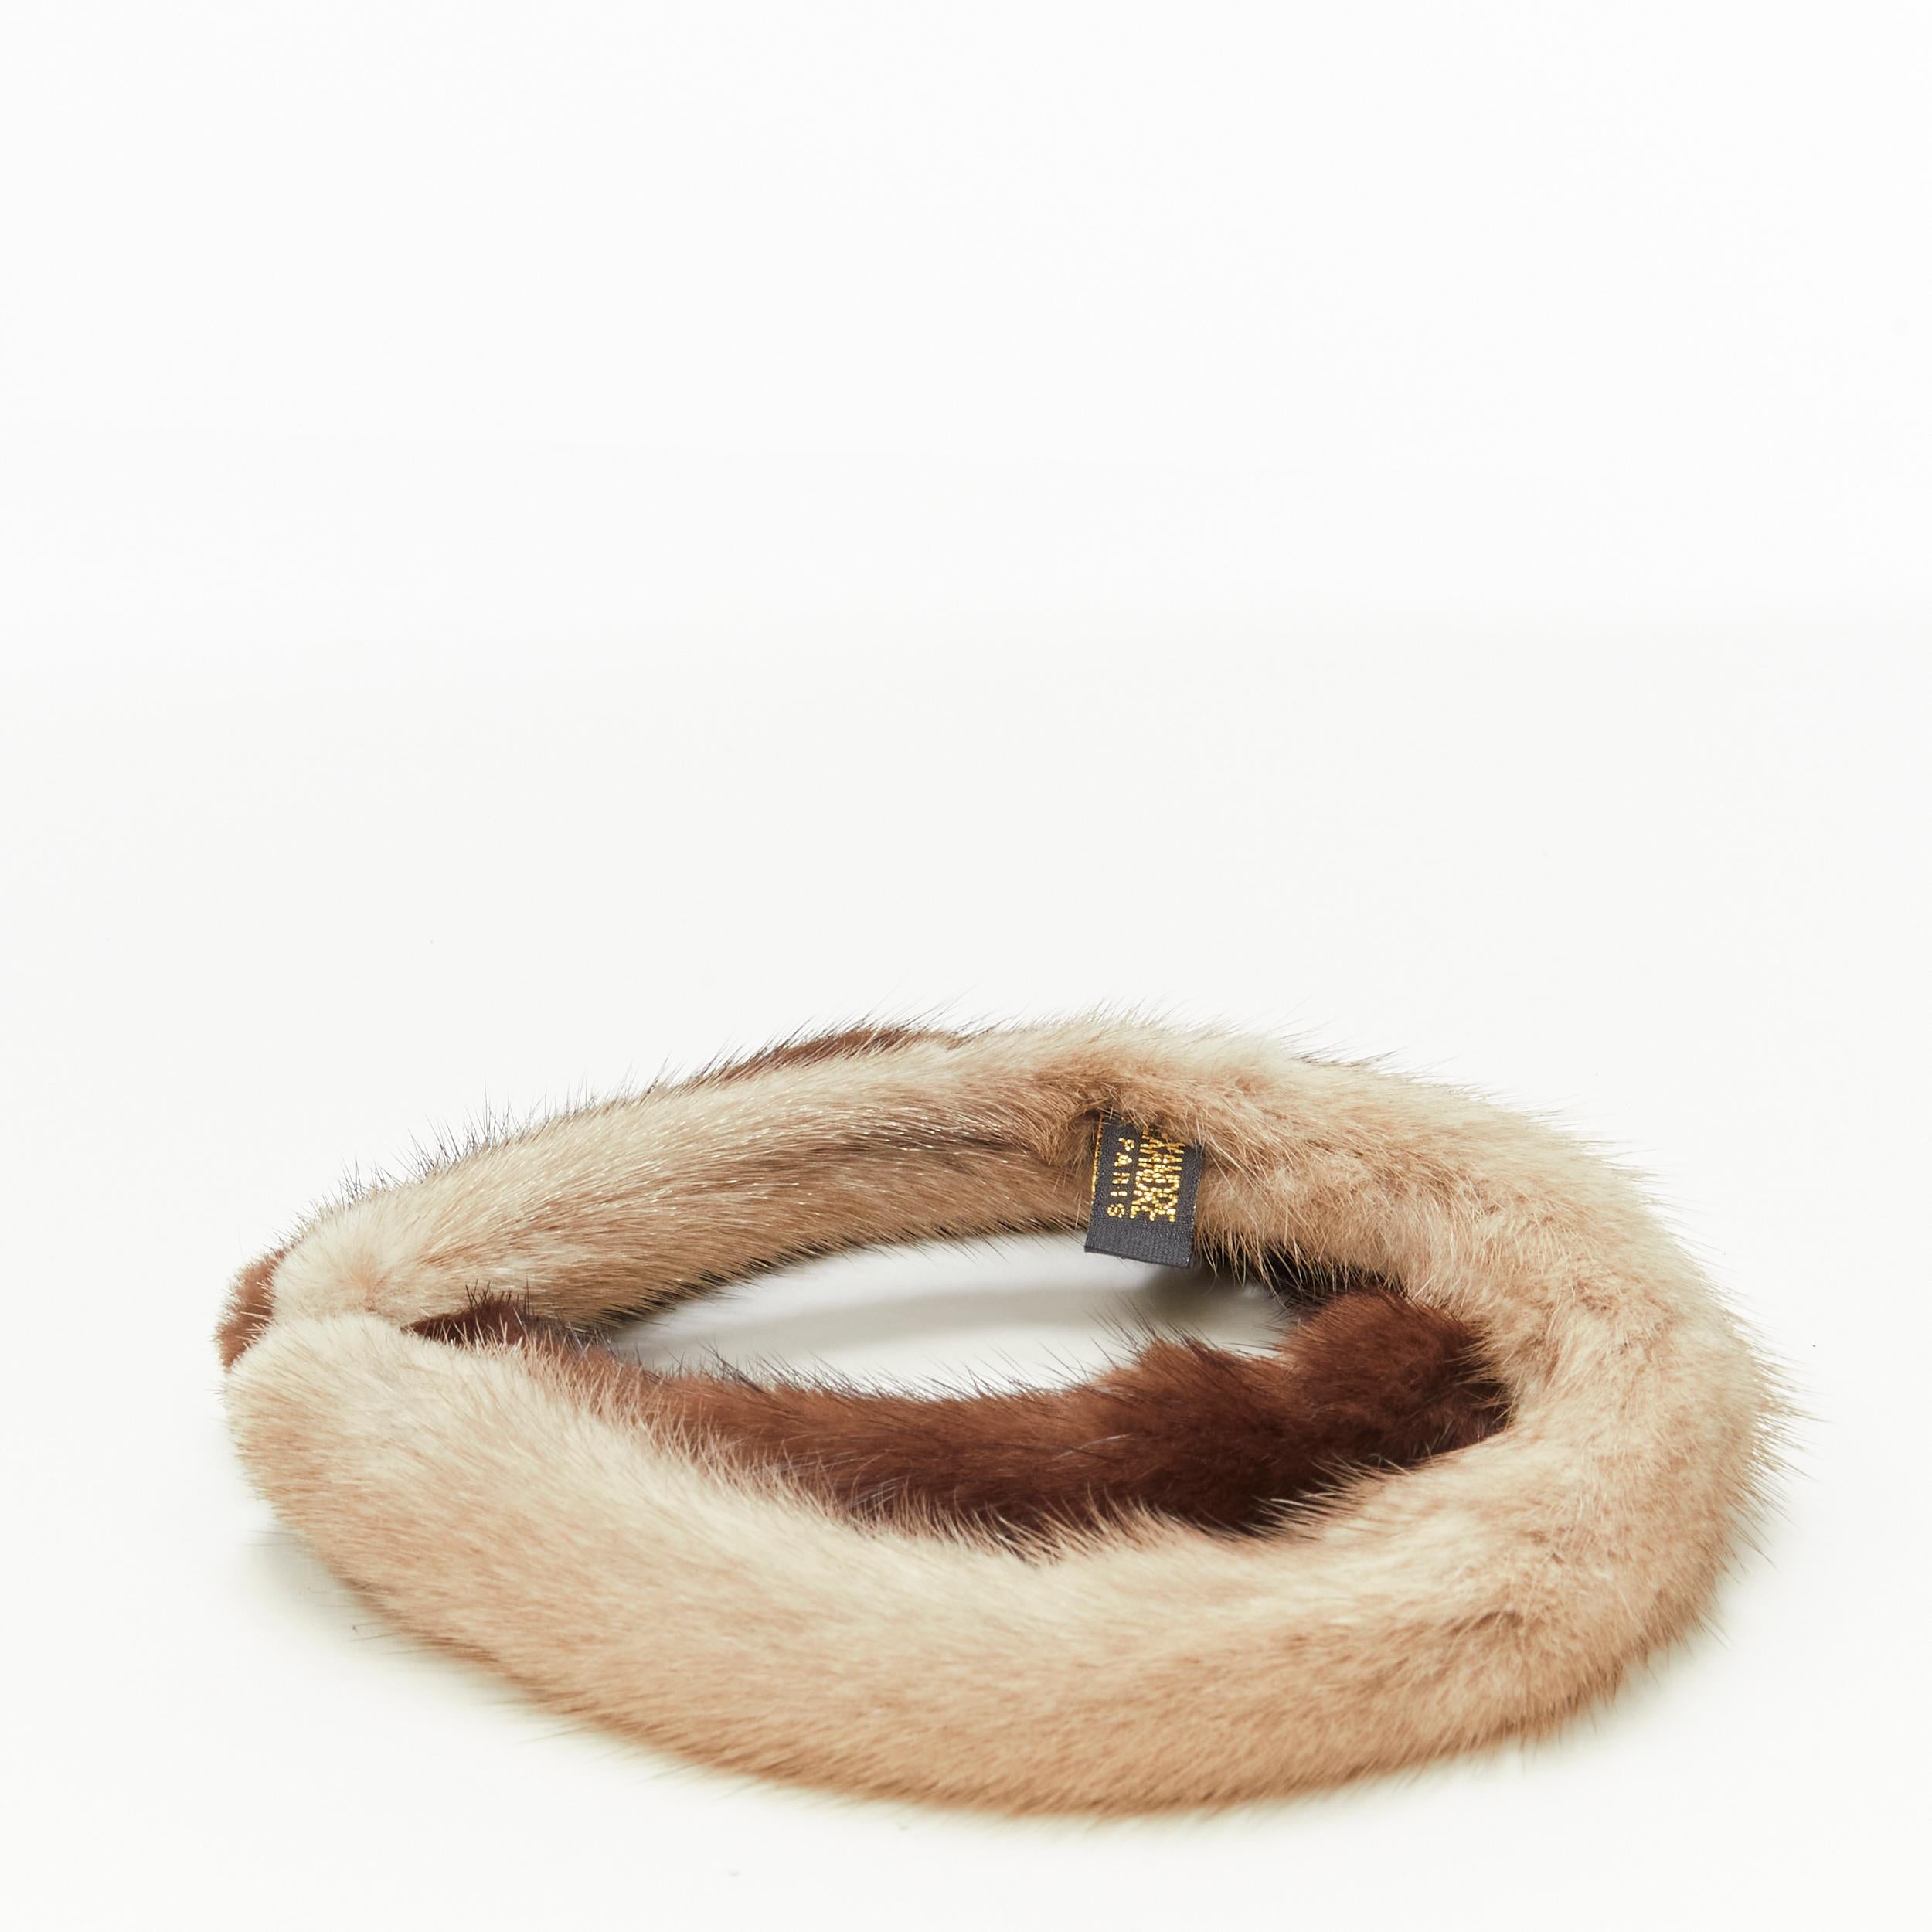 ALEXANDER ZOUARI 2X brown natural grey mink fur headband
Brand: Alexandre Zouari
Designer: Alexandre Zouari
Material: Fur
Color: Brown
Pattern: Solid
Made in: France

CONDITION:
Condition: Excellent, this item was pre-owned and is in excellent